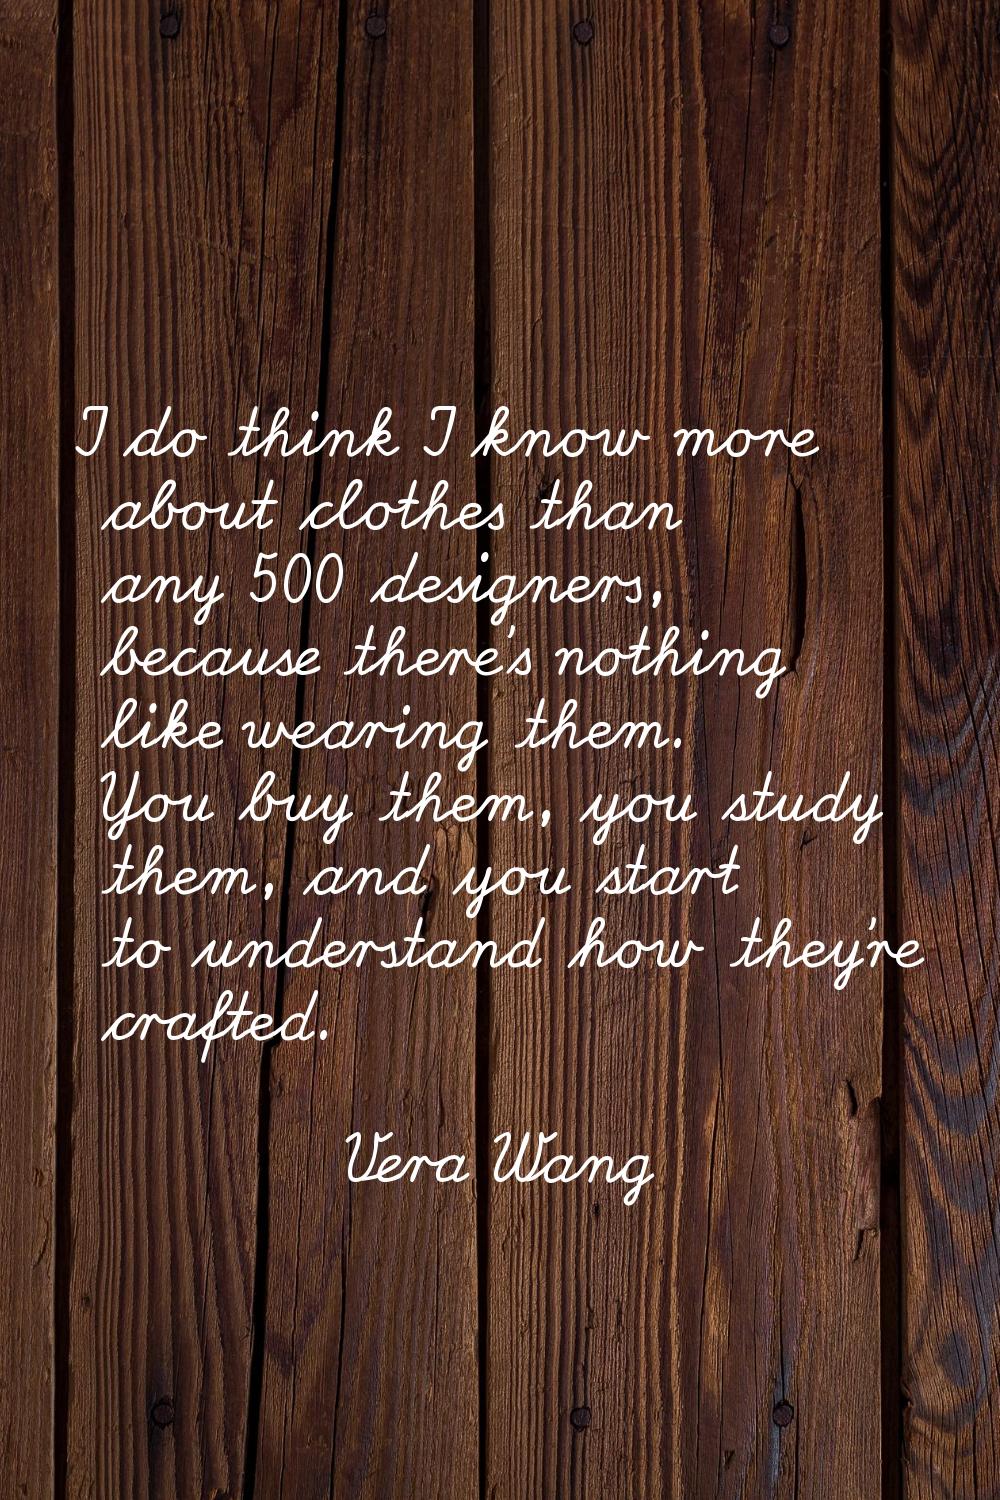 I do think I know more about clothes than any 500 designers, because there's nothing like wearing t